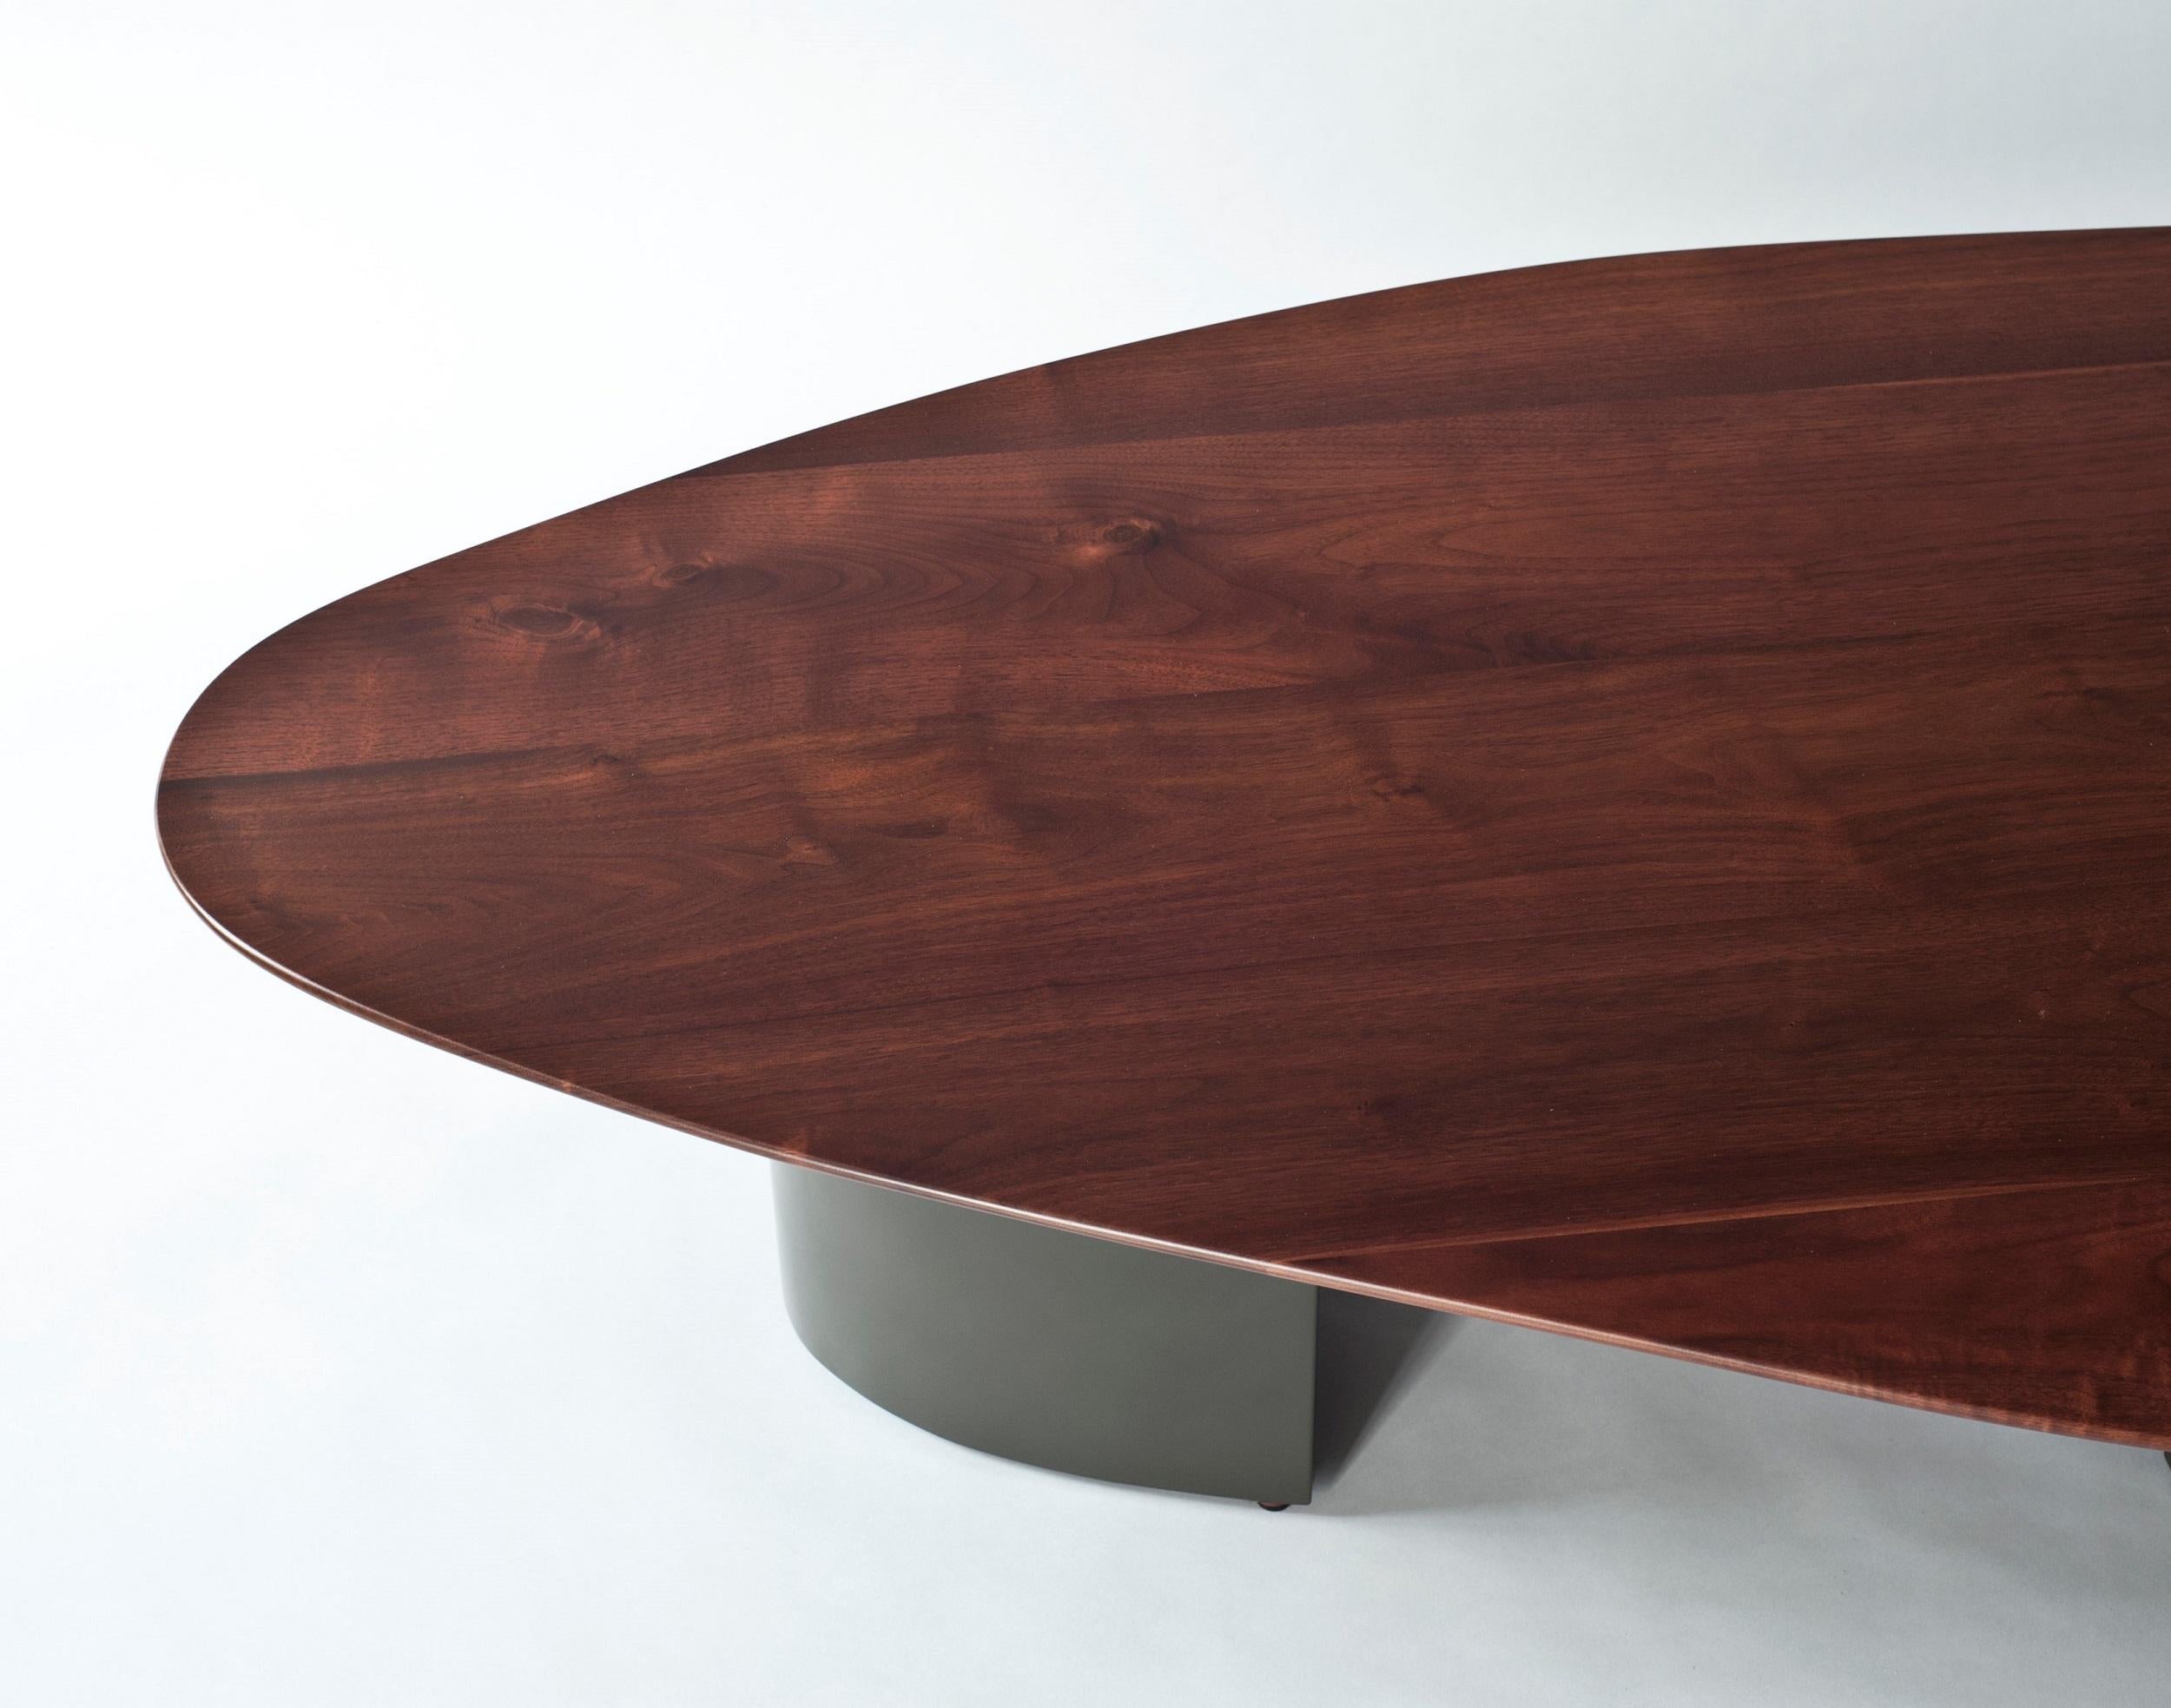 Sample sale
As Shown. Condition: Good.

This is a showroom floor model being sold as-is (not made to order). For made-to-order items, please reference the original item listing.

Sculptural solid walnut top with base in olive grey lacquer.